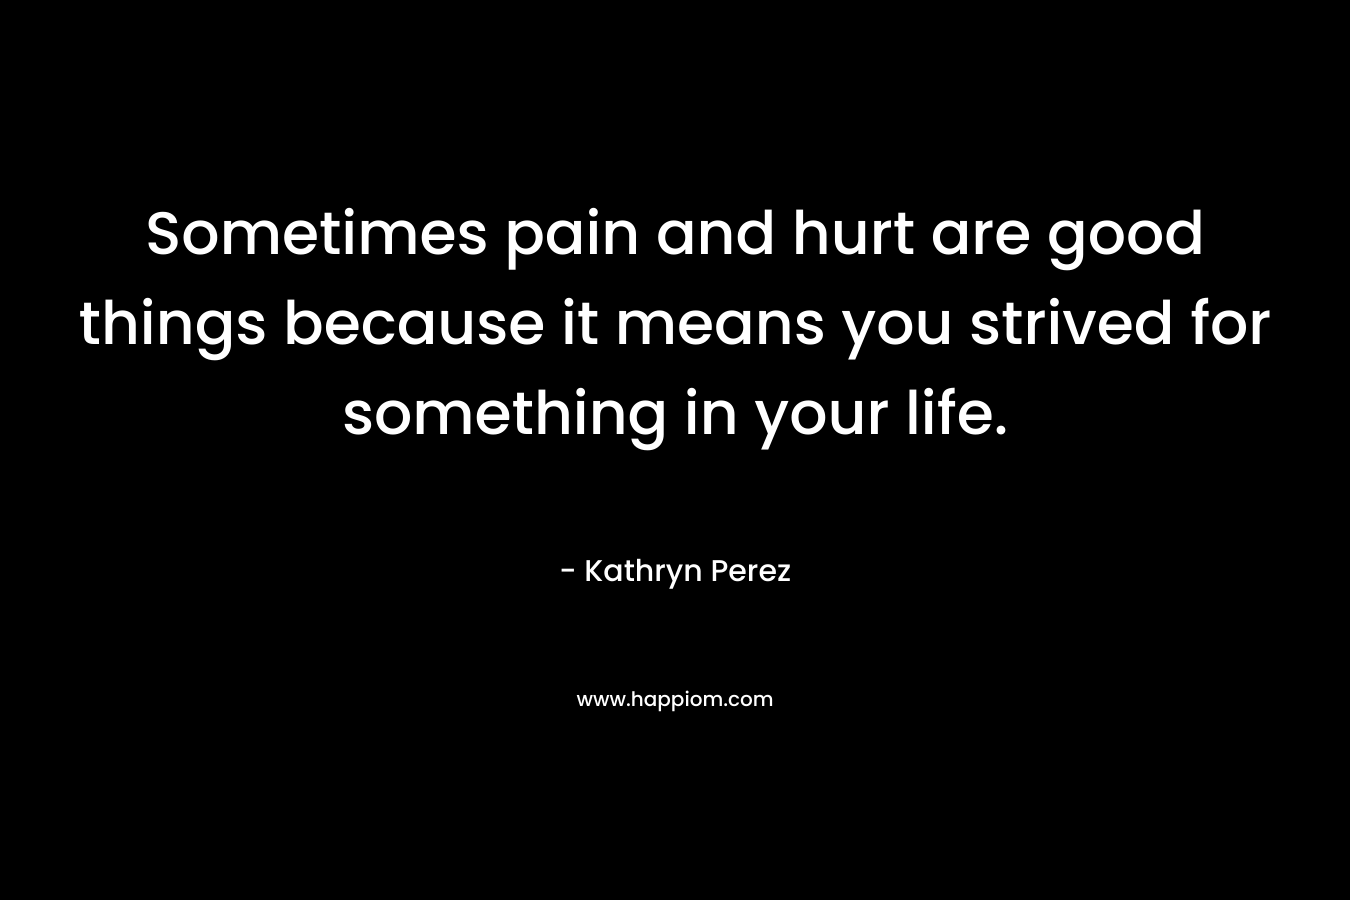 Sometimes pain and hurt are good things because it means you strived for something in your life. – Kathryn Perez